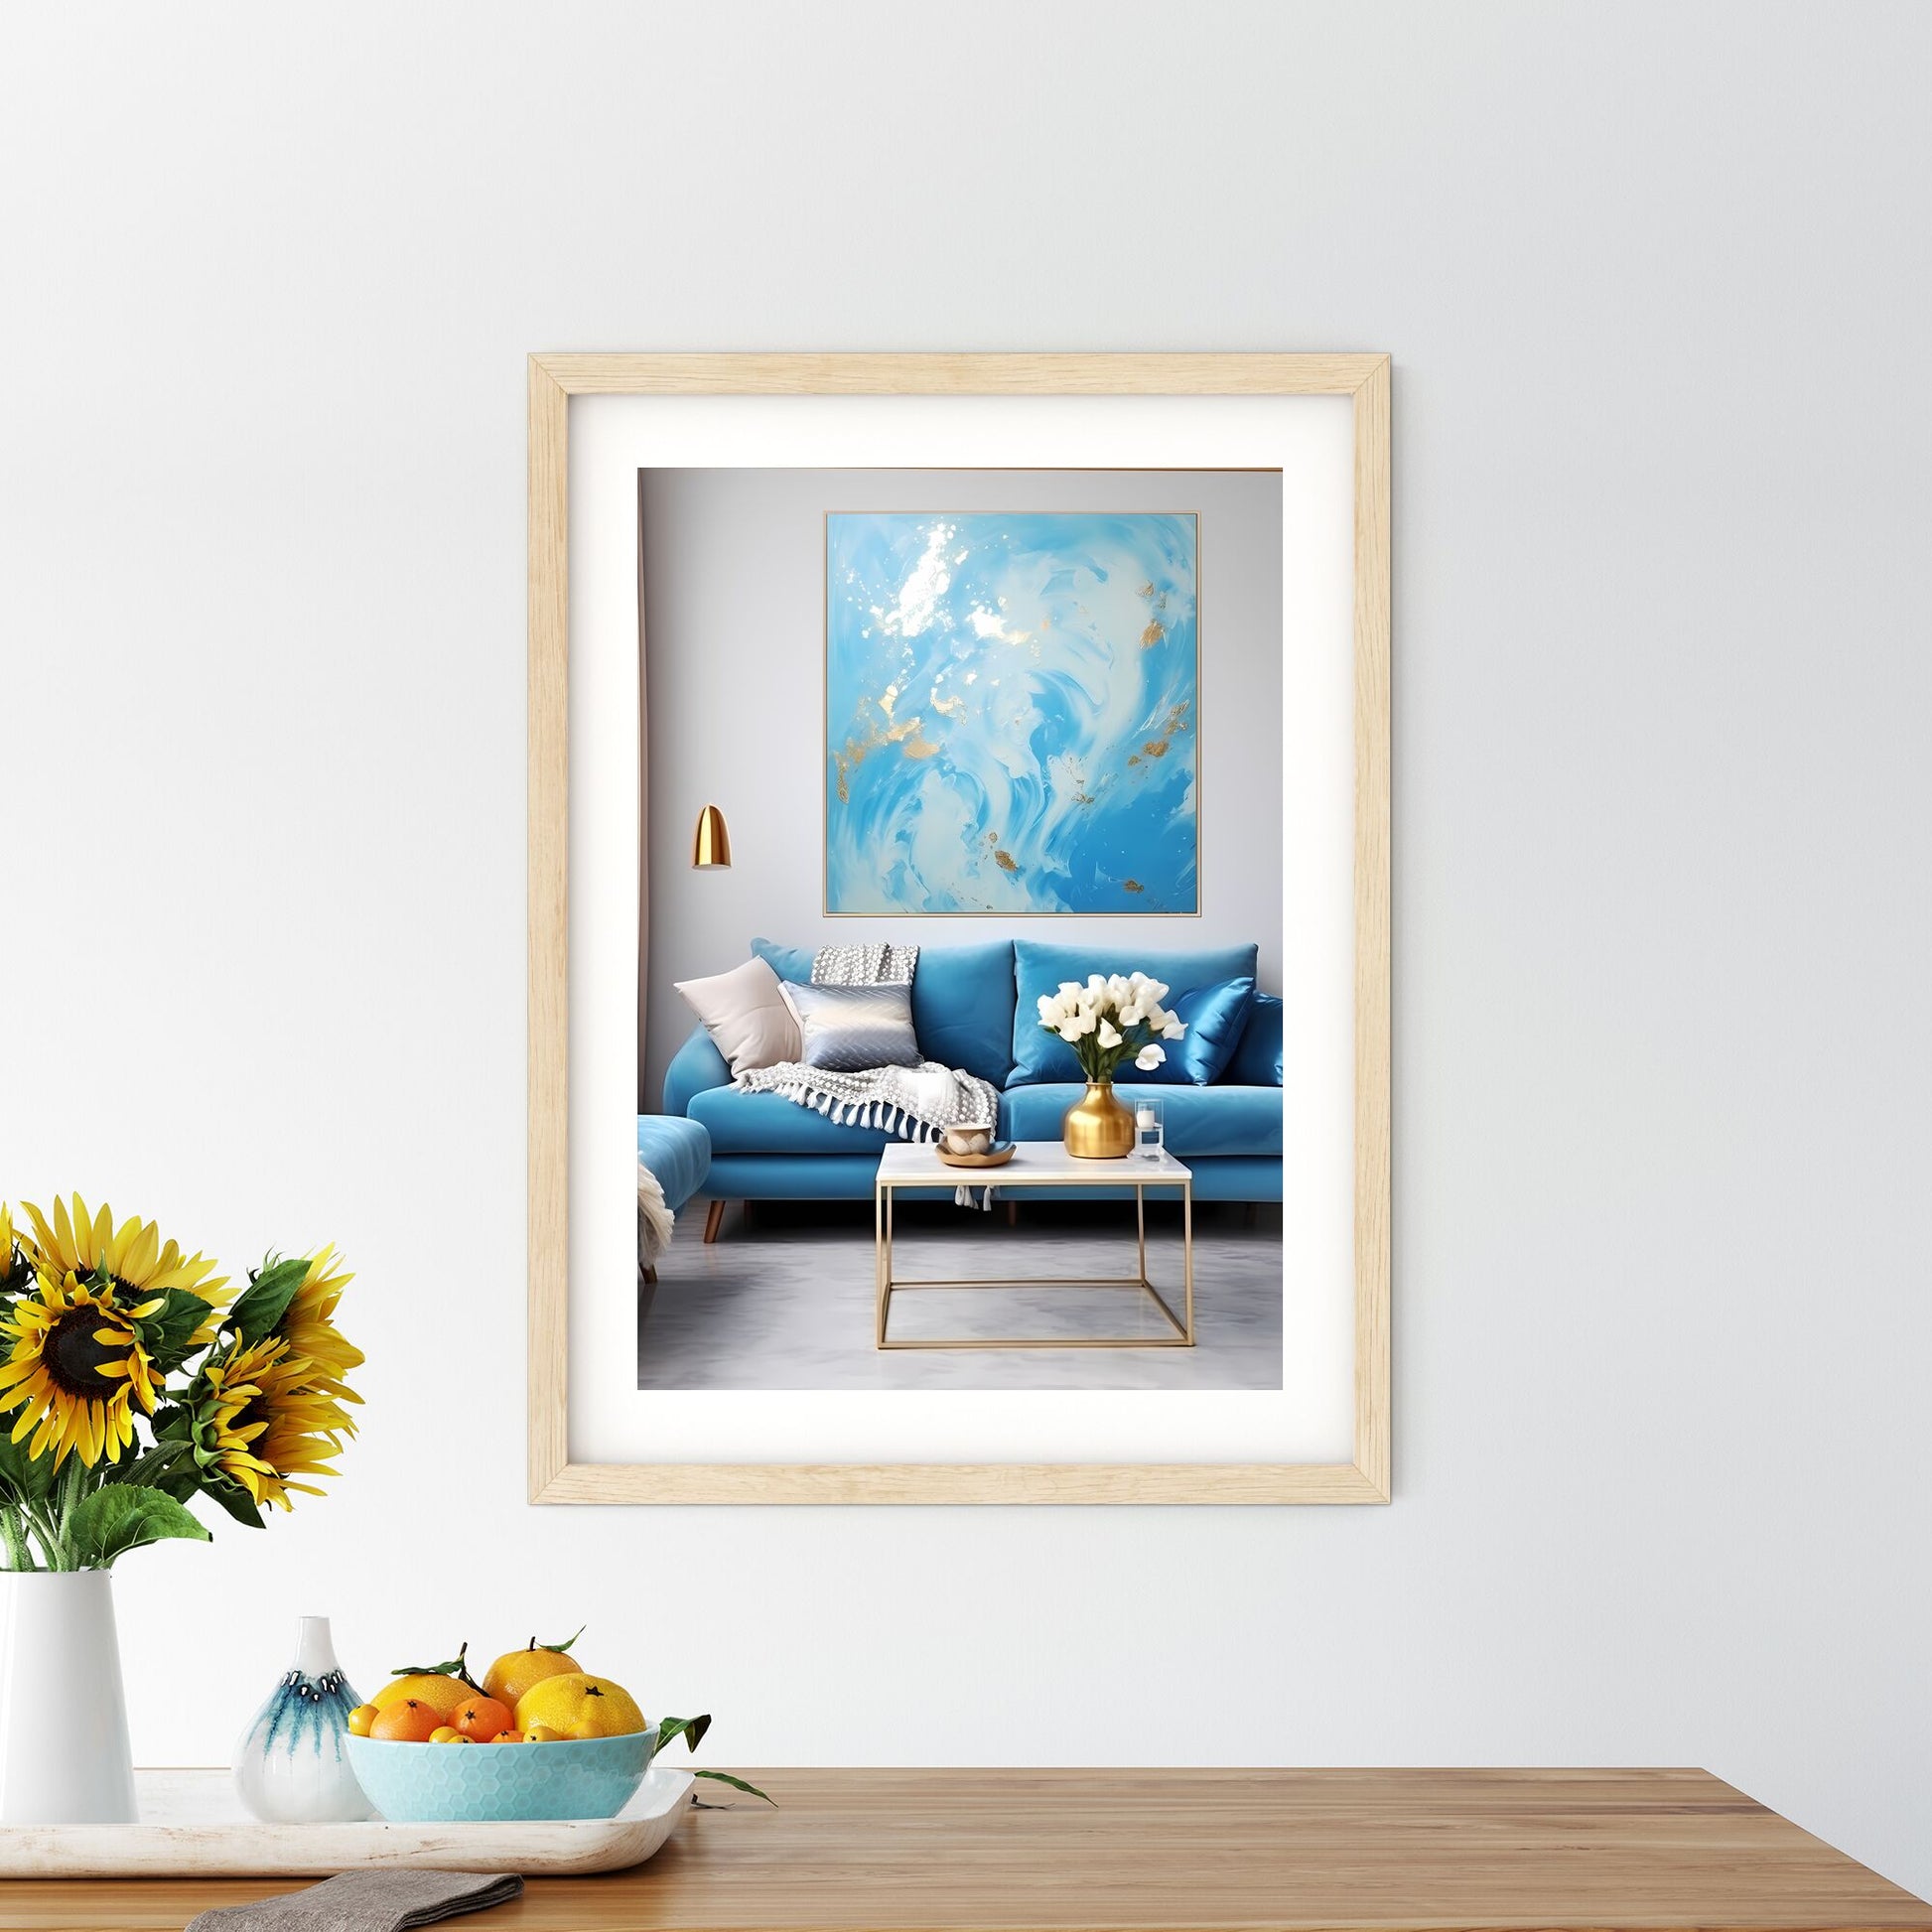 Blue And Gold Living Room With A Blue Couch And A Painting On The Wall Art Print Default Title